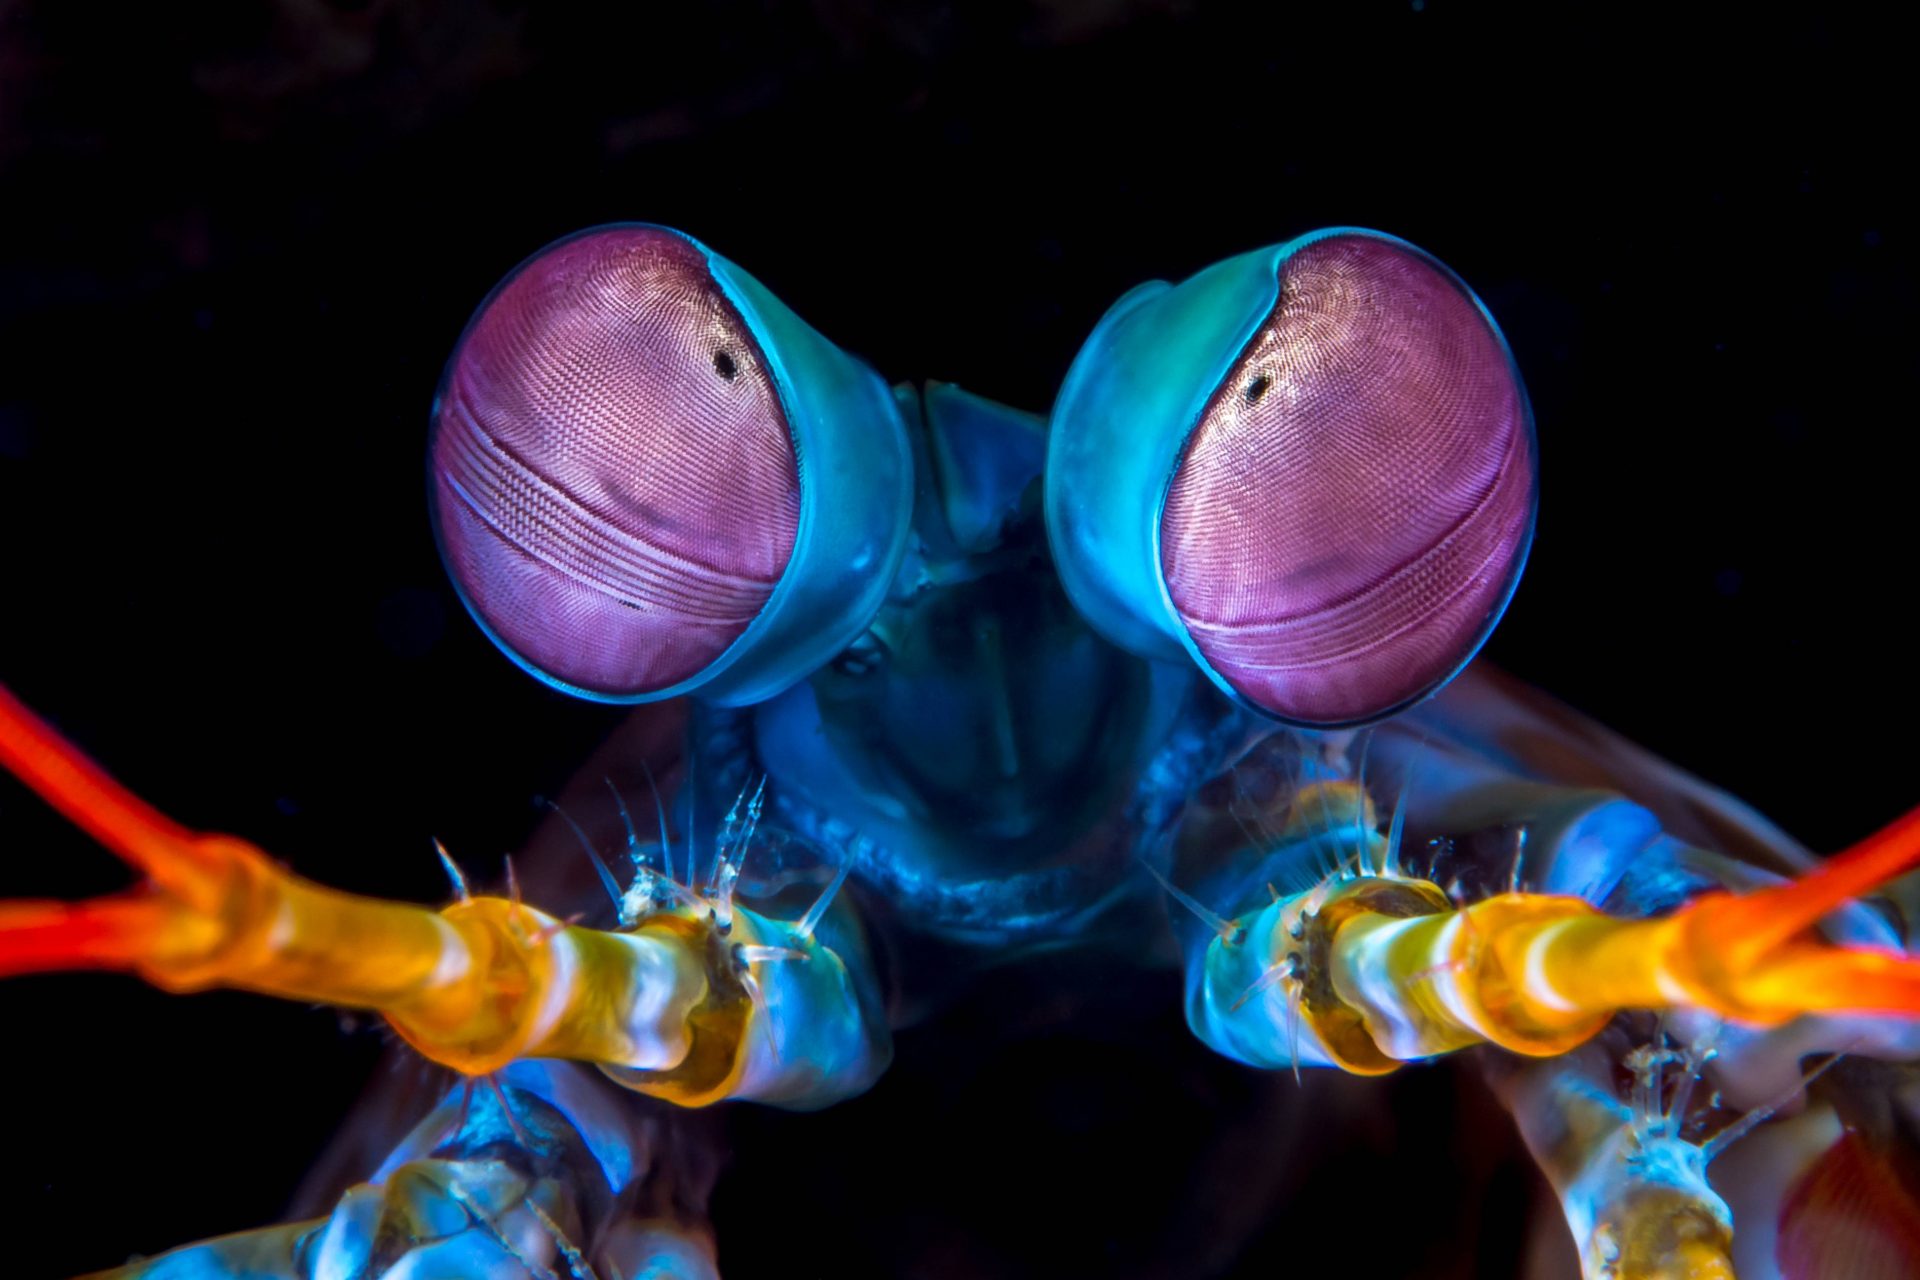 Mantis shrimp throw lethal punches moral 9 days after birth